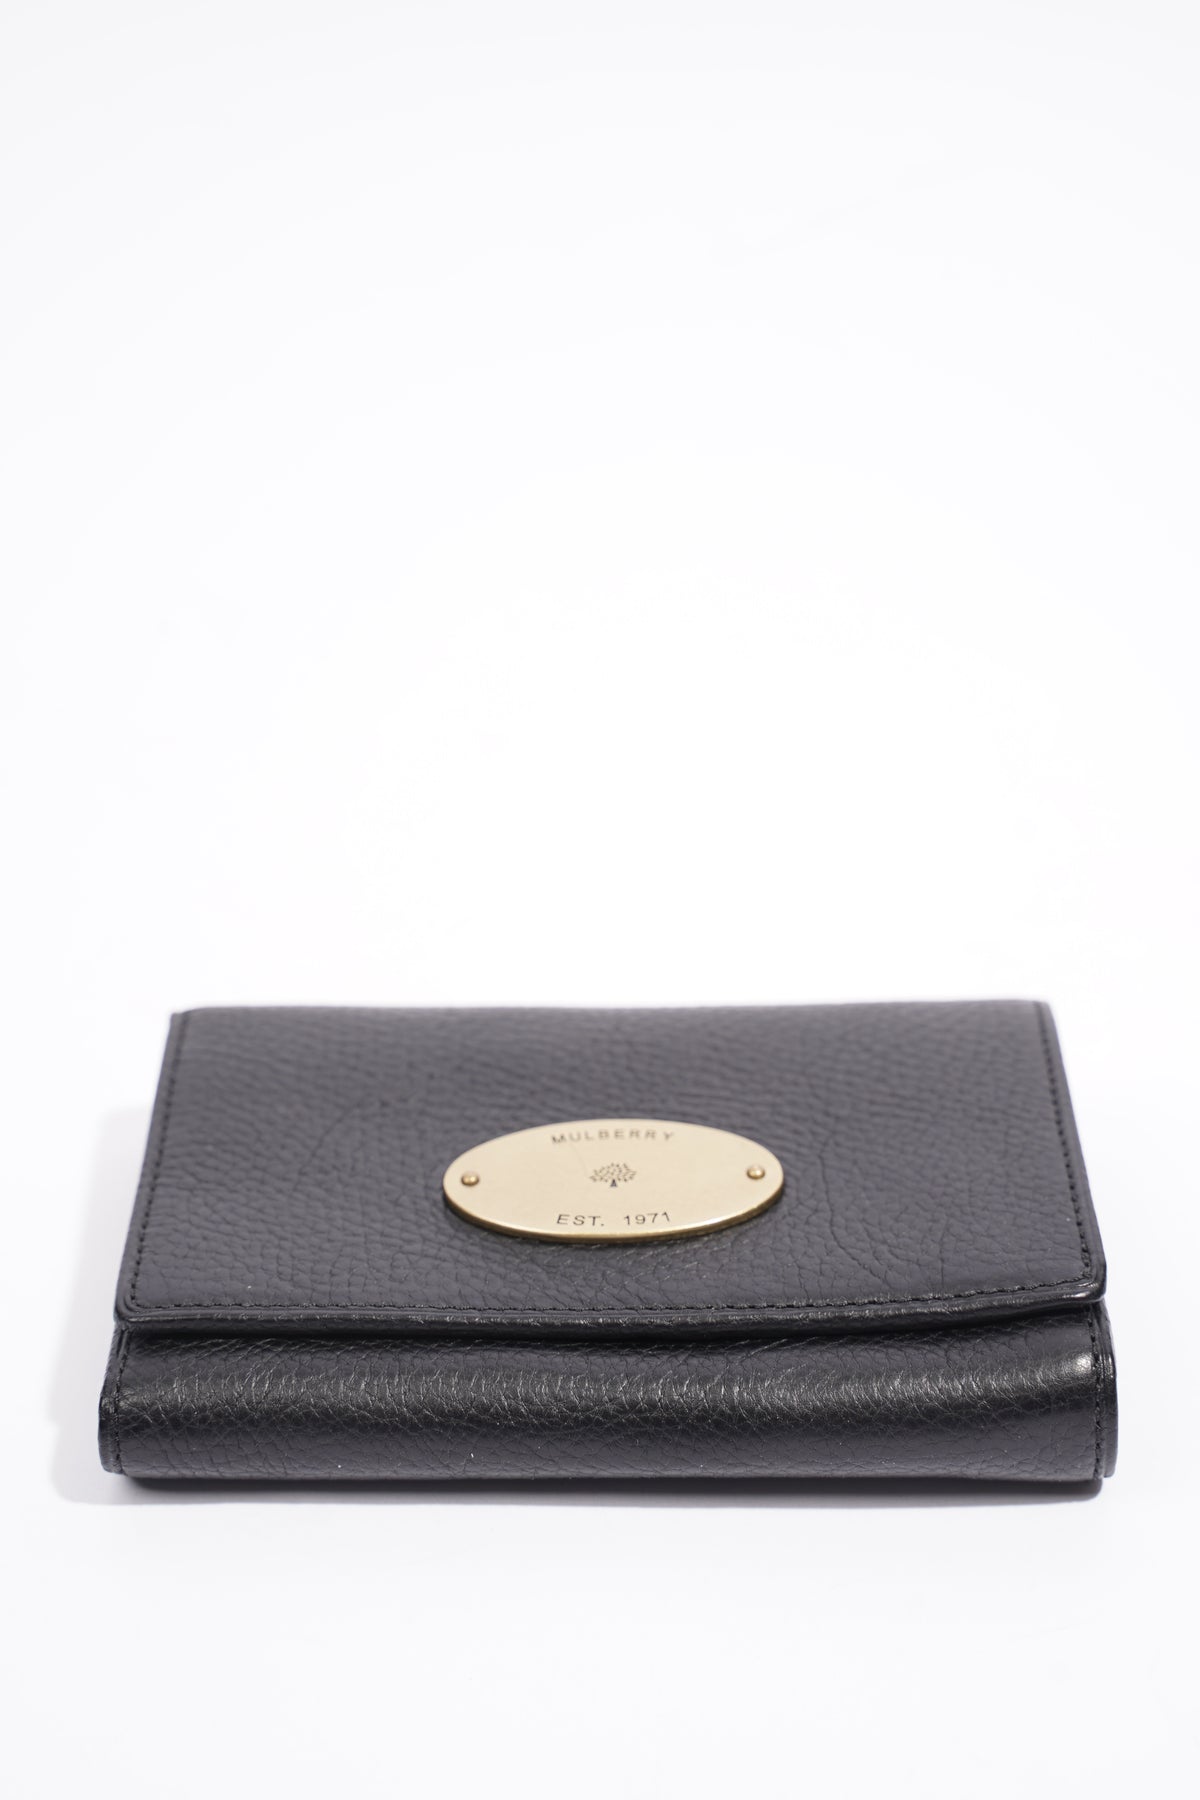 Mulberry French Purse, Small Leather Goods - Designer Exchange | Buy Sell  Exchange